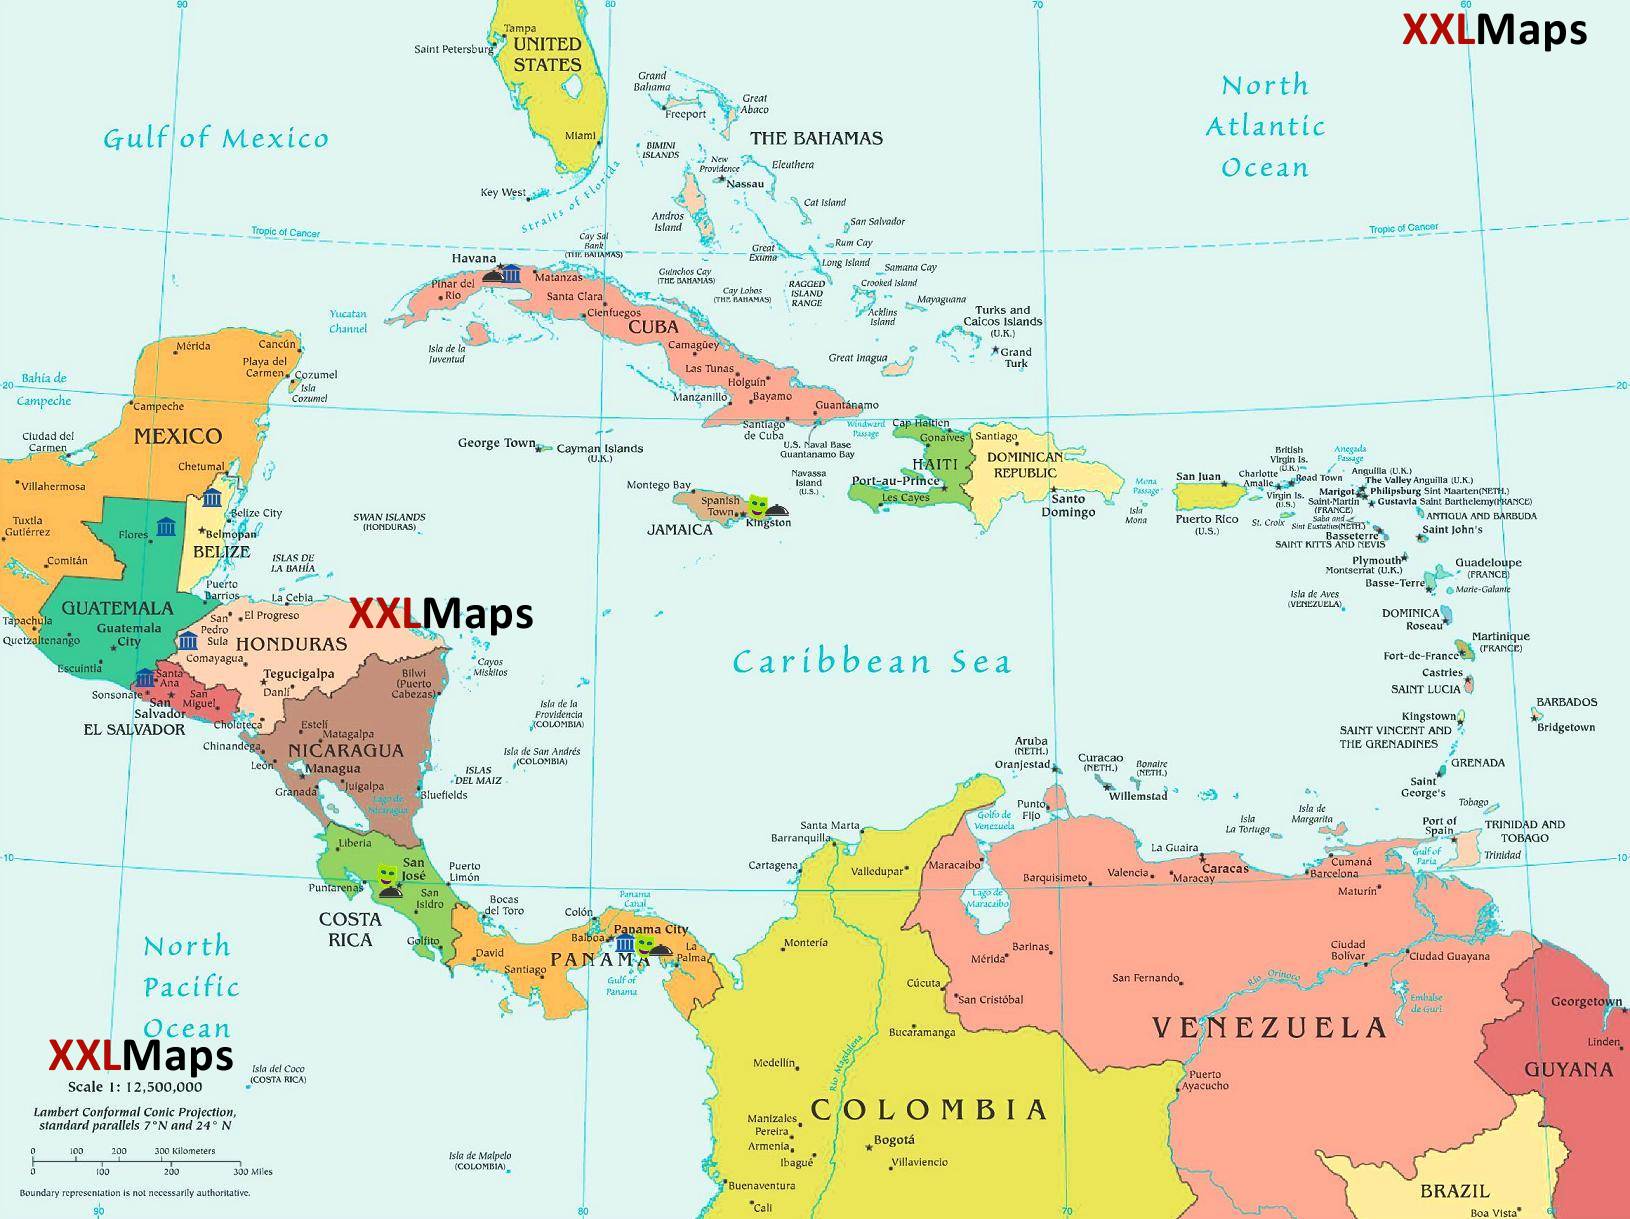 Political map of Central America